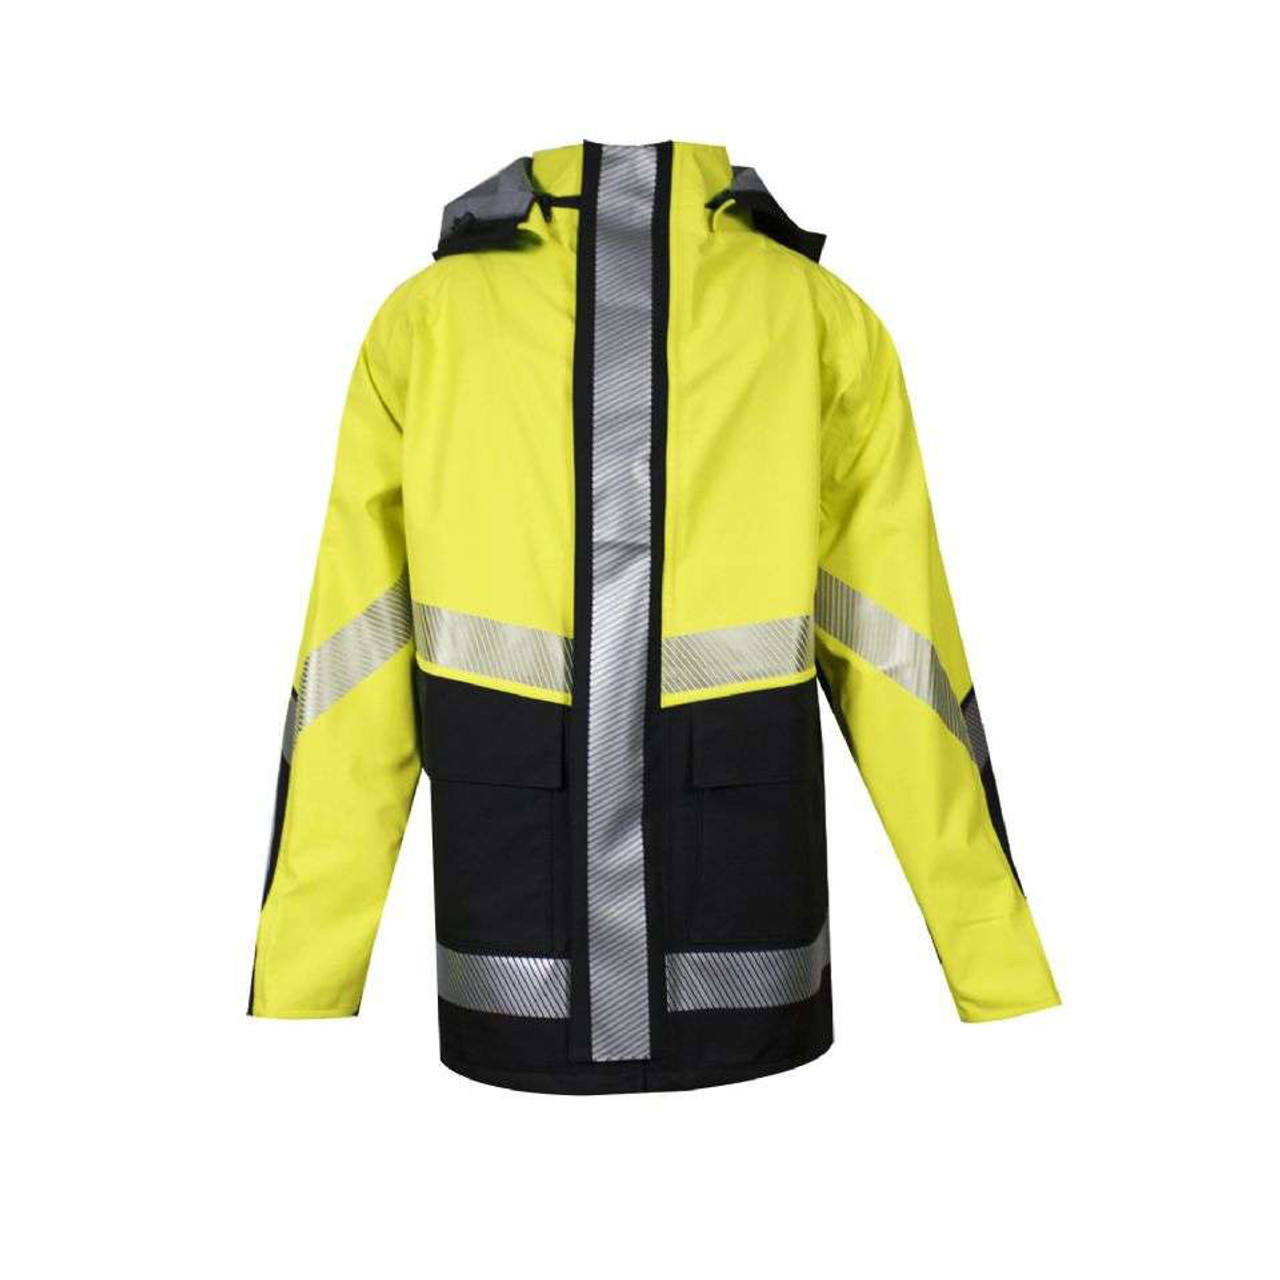 Safety Jackets for Men Waterproof With High Visibility Hoodie Hi Vis Jacket 2XL 5200-FY ANSI 107 Class 3 Compliant Brite Safety Style 5200 Safety Raingear 